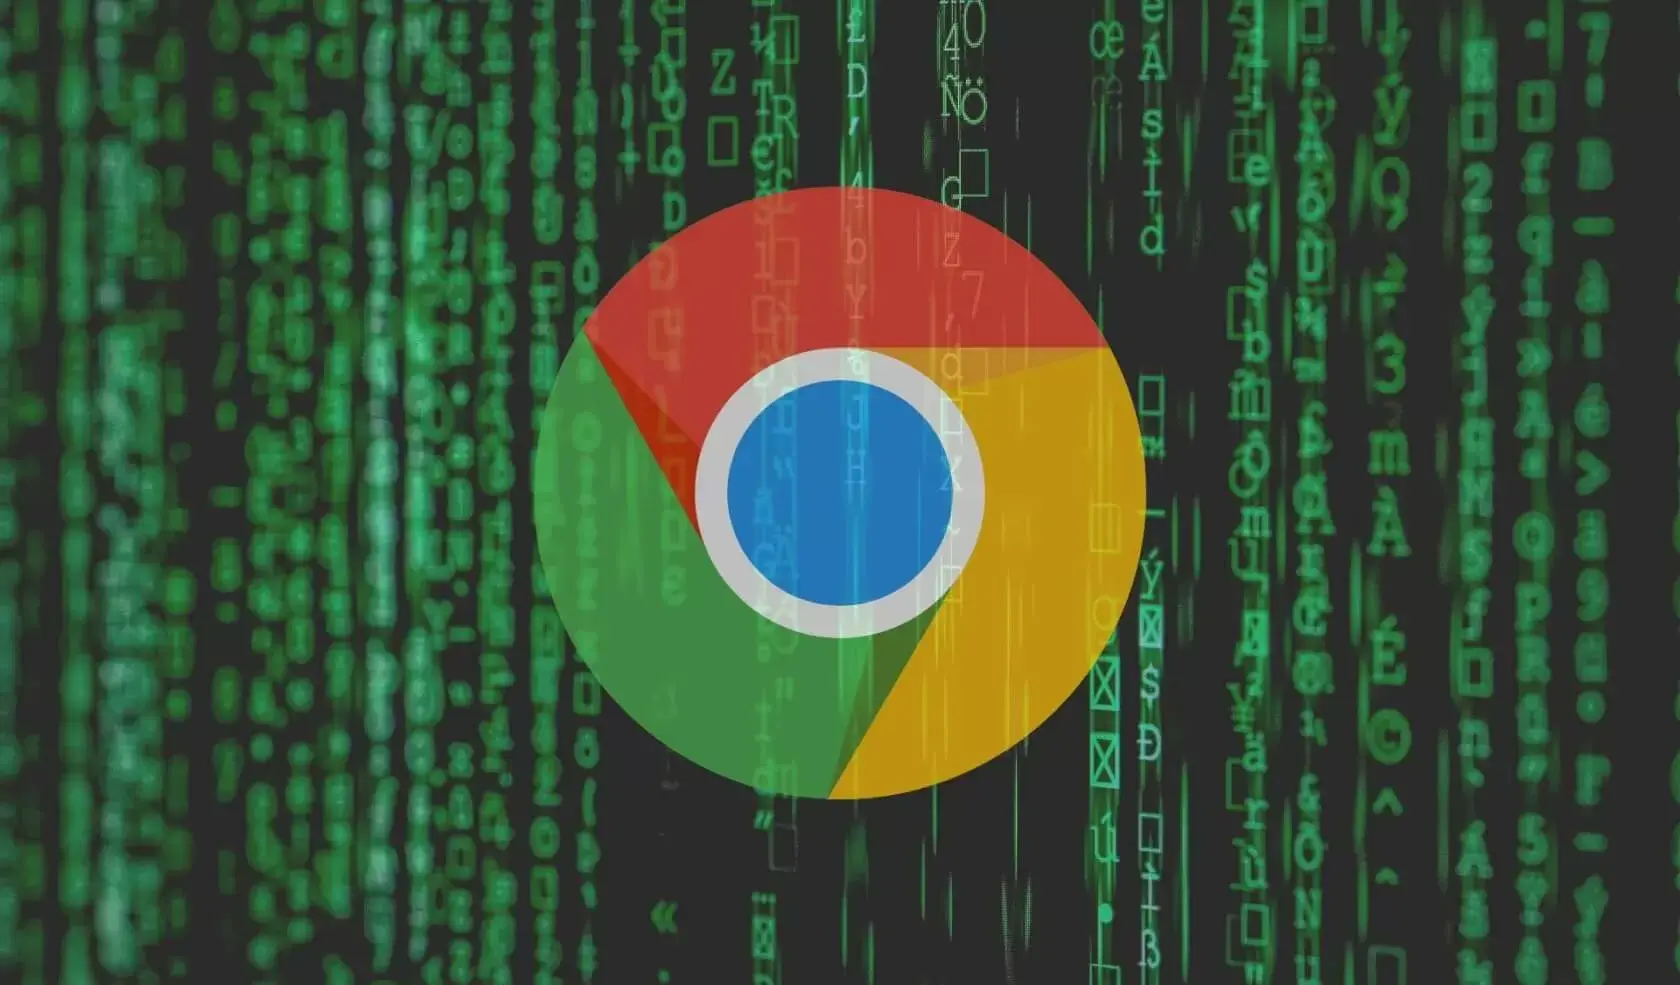 Major Security Flaws Exposed in Google Chrome OS – Urgent Action Required